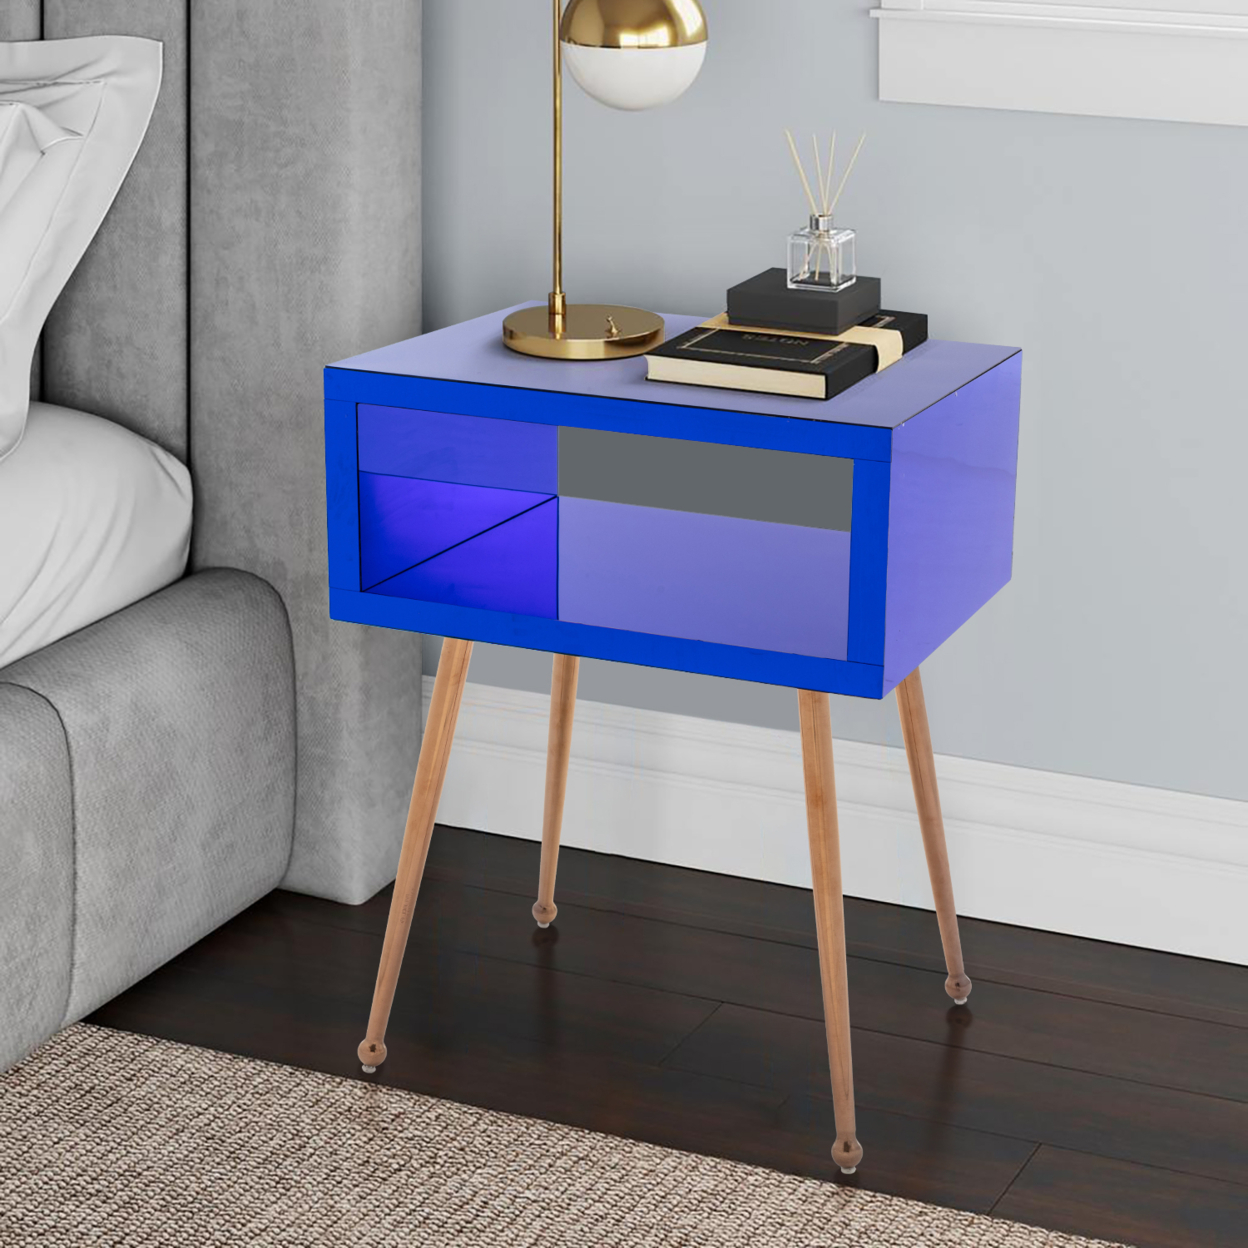 COOLMORE MIRROR END TABLE MIRROR NIGHTSTAND END&SIDE TABLE (Navy)